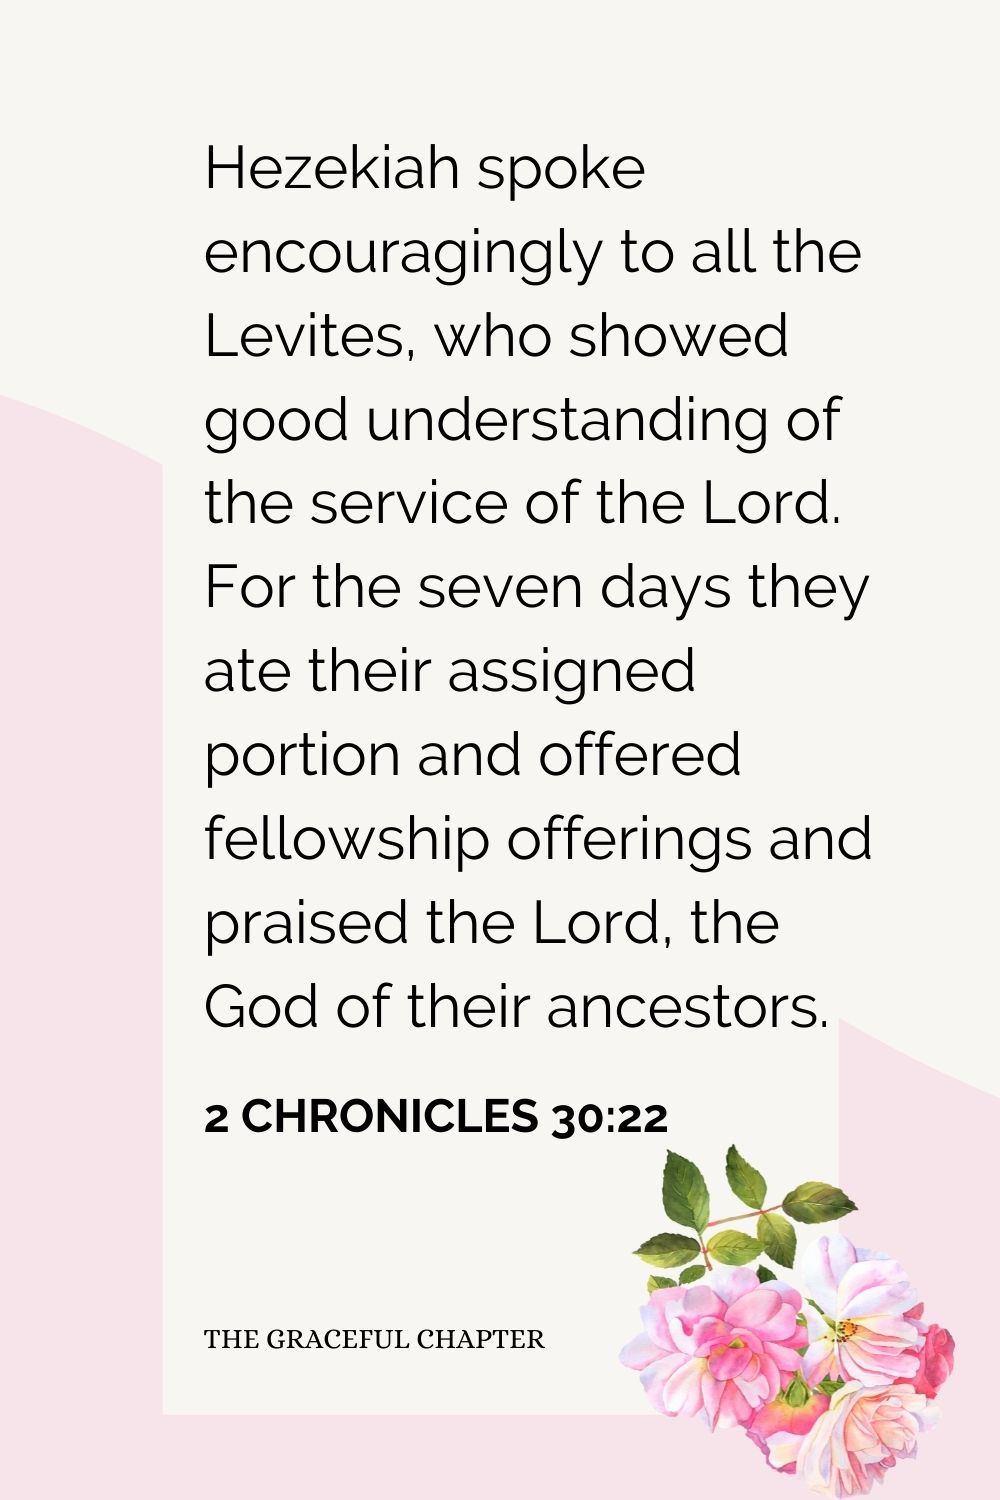 Hezekiah spoke encouragingly to all the Levites, who showed good understanding of the service of the Lord. For the seven days they ate their assigned portion and offered fellowship offerings and praised the Lord, the God of their ancestors. 2 Chronicles 30:22